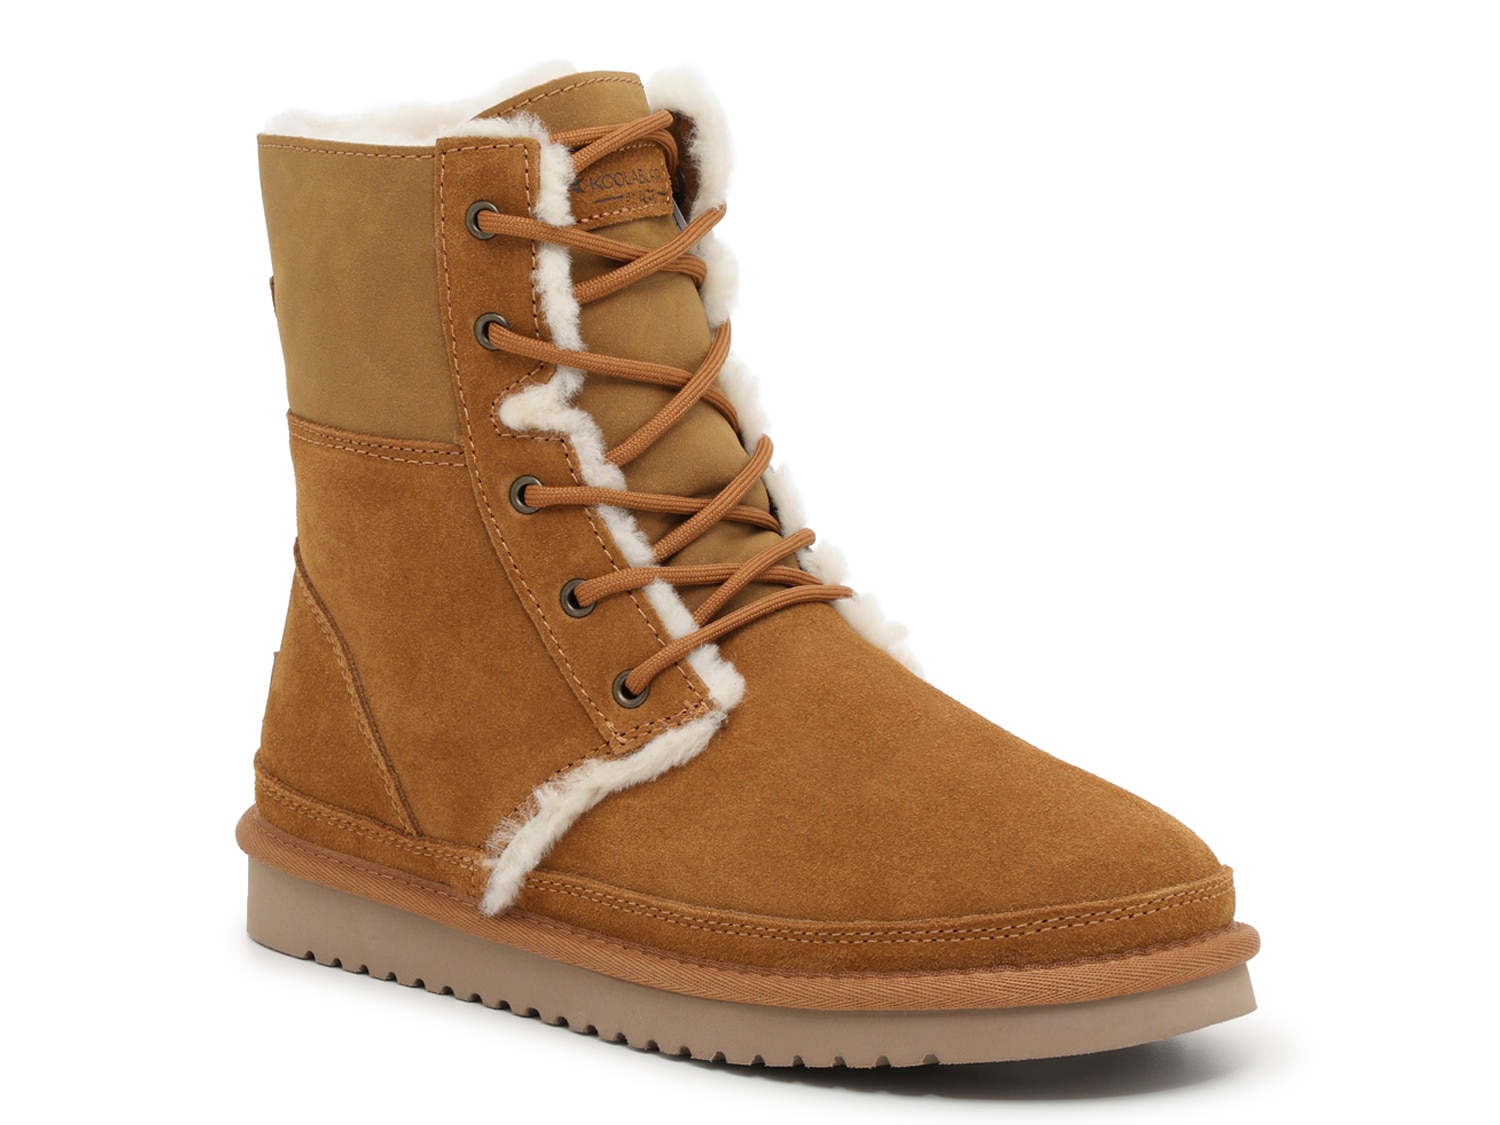 UGG, Shoes, Ugg Lv Louis Vuitton Tan Cream Suede Fur Rainbow Boots